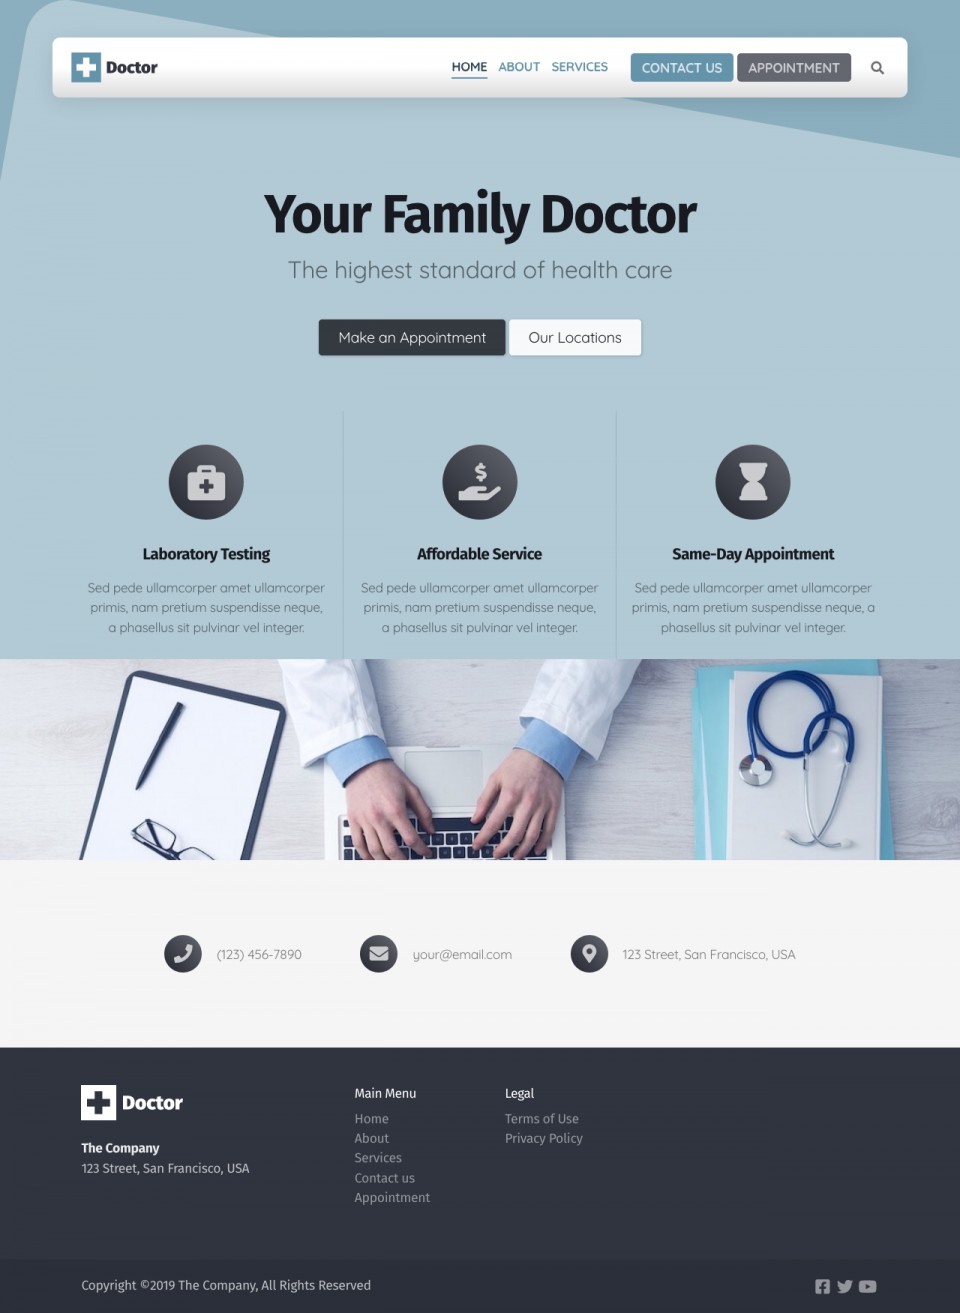 Doctor Website Template - Ideal for family doctors, hospitals, healthcare providers, and those in the fields of surgery and medication